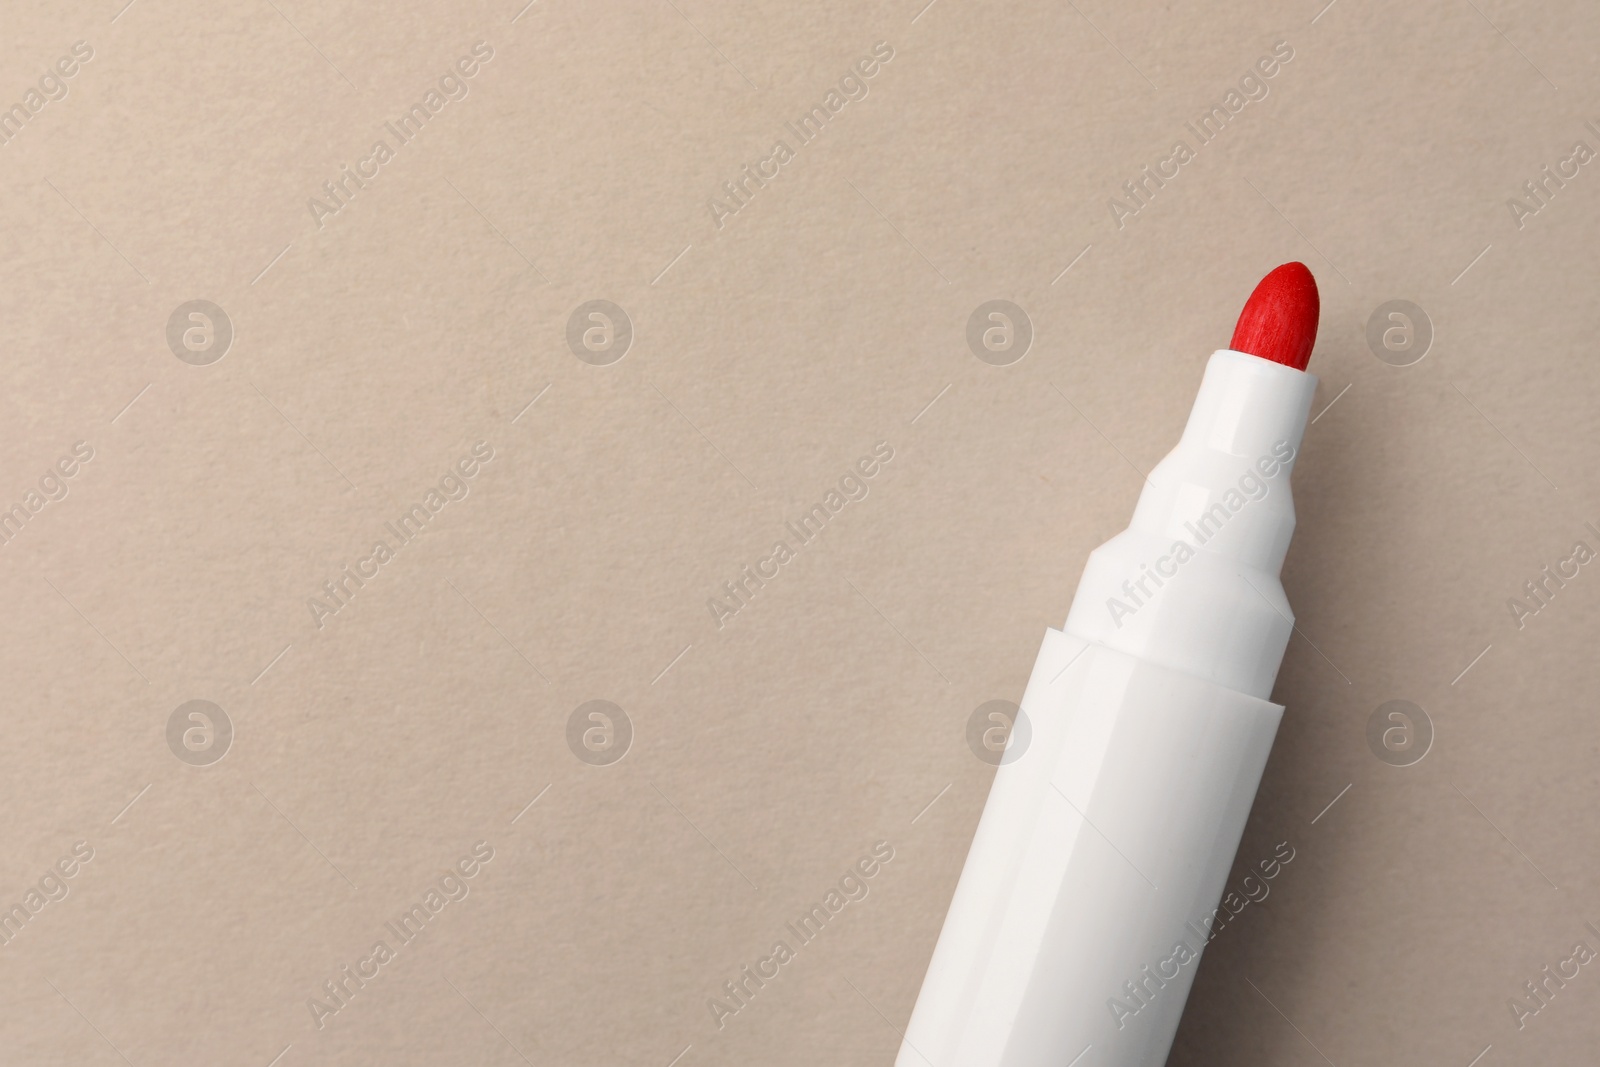 Photo of Bright red marker on beige background, top view. Space for text